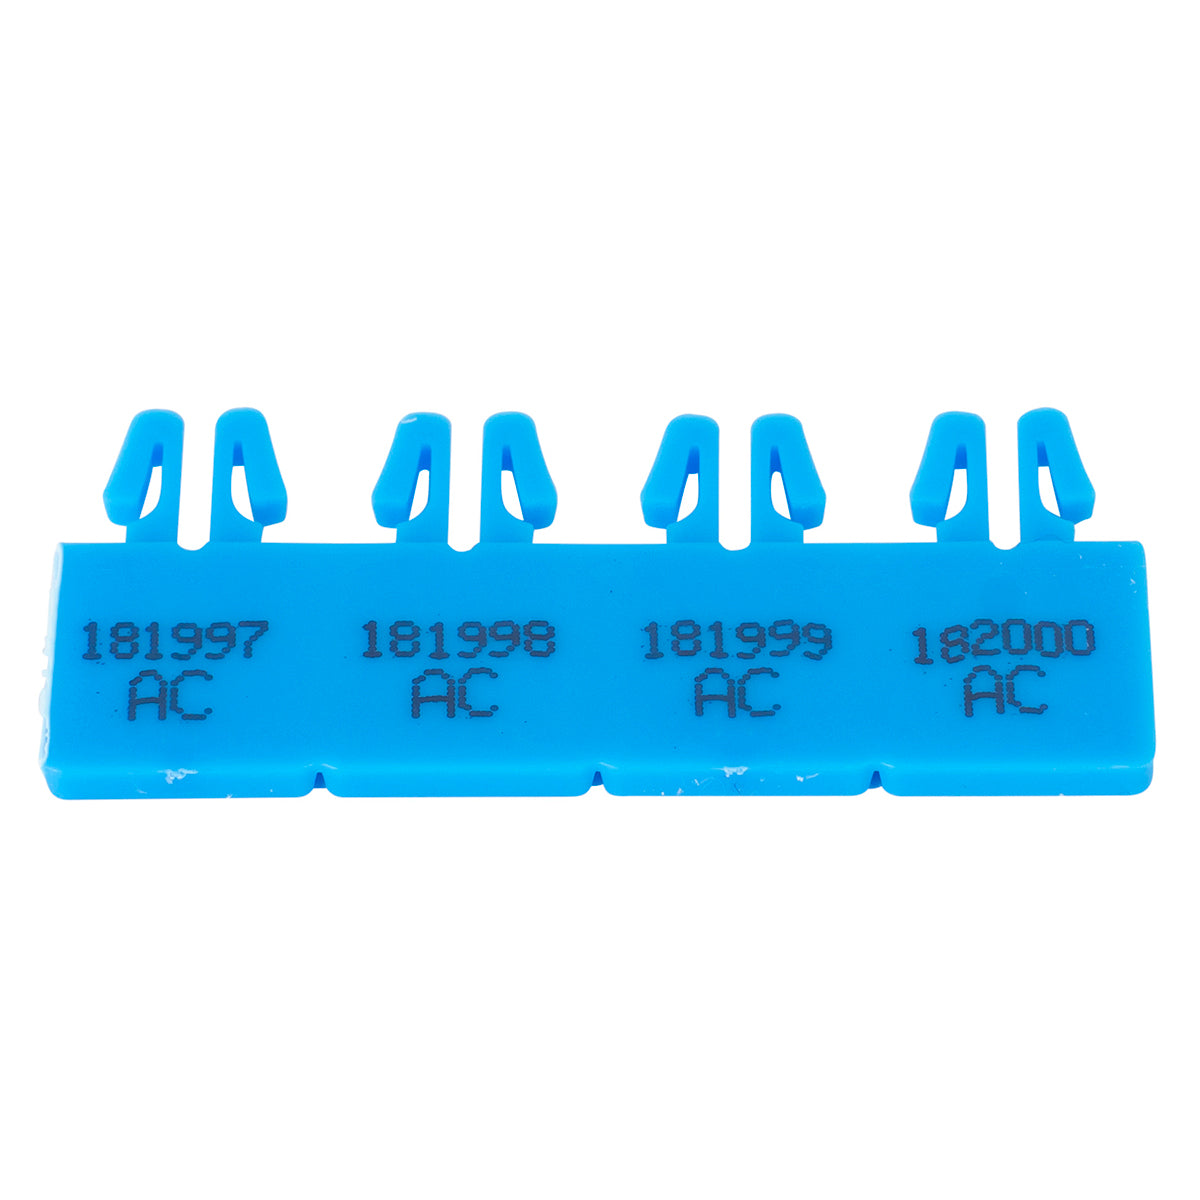 Arrow Security Seals Numbered (Blue)